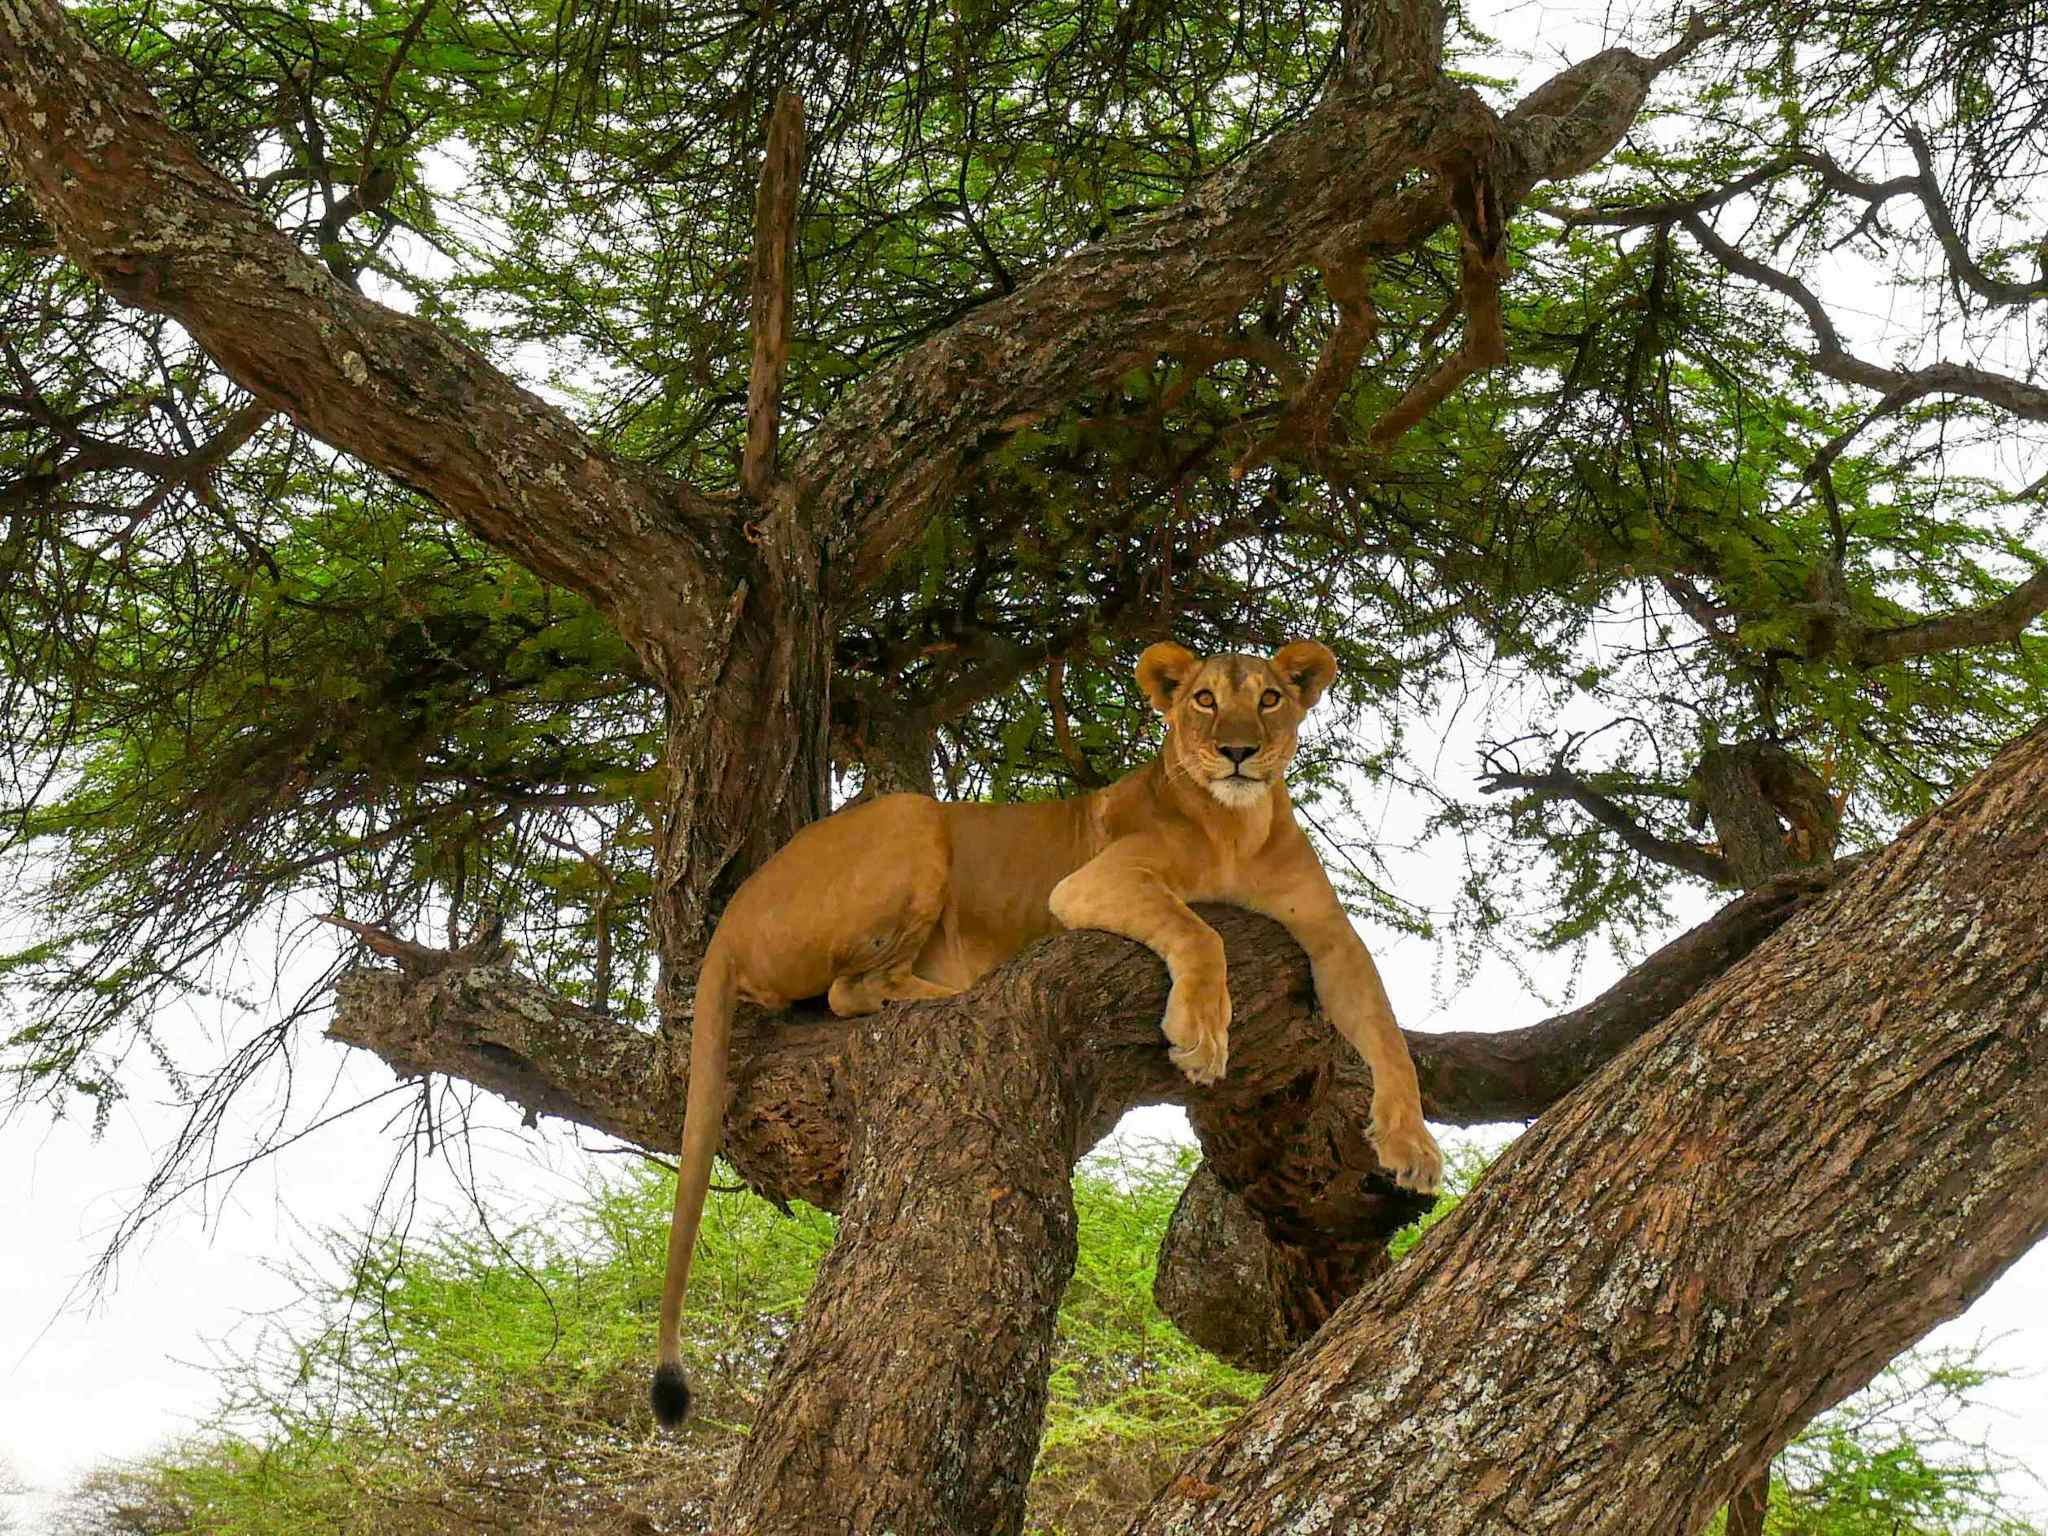 A lion sitting in the branches of an acacia tree, Tanzania.